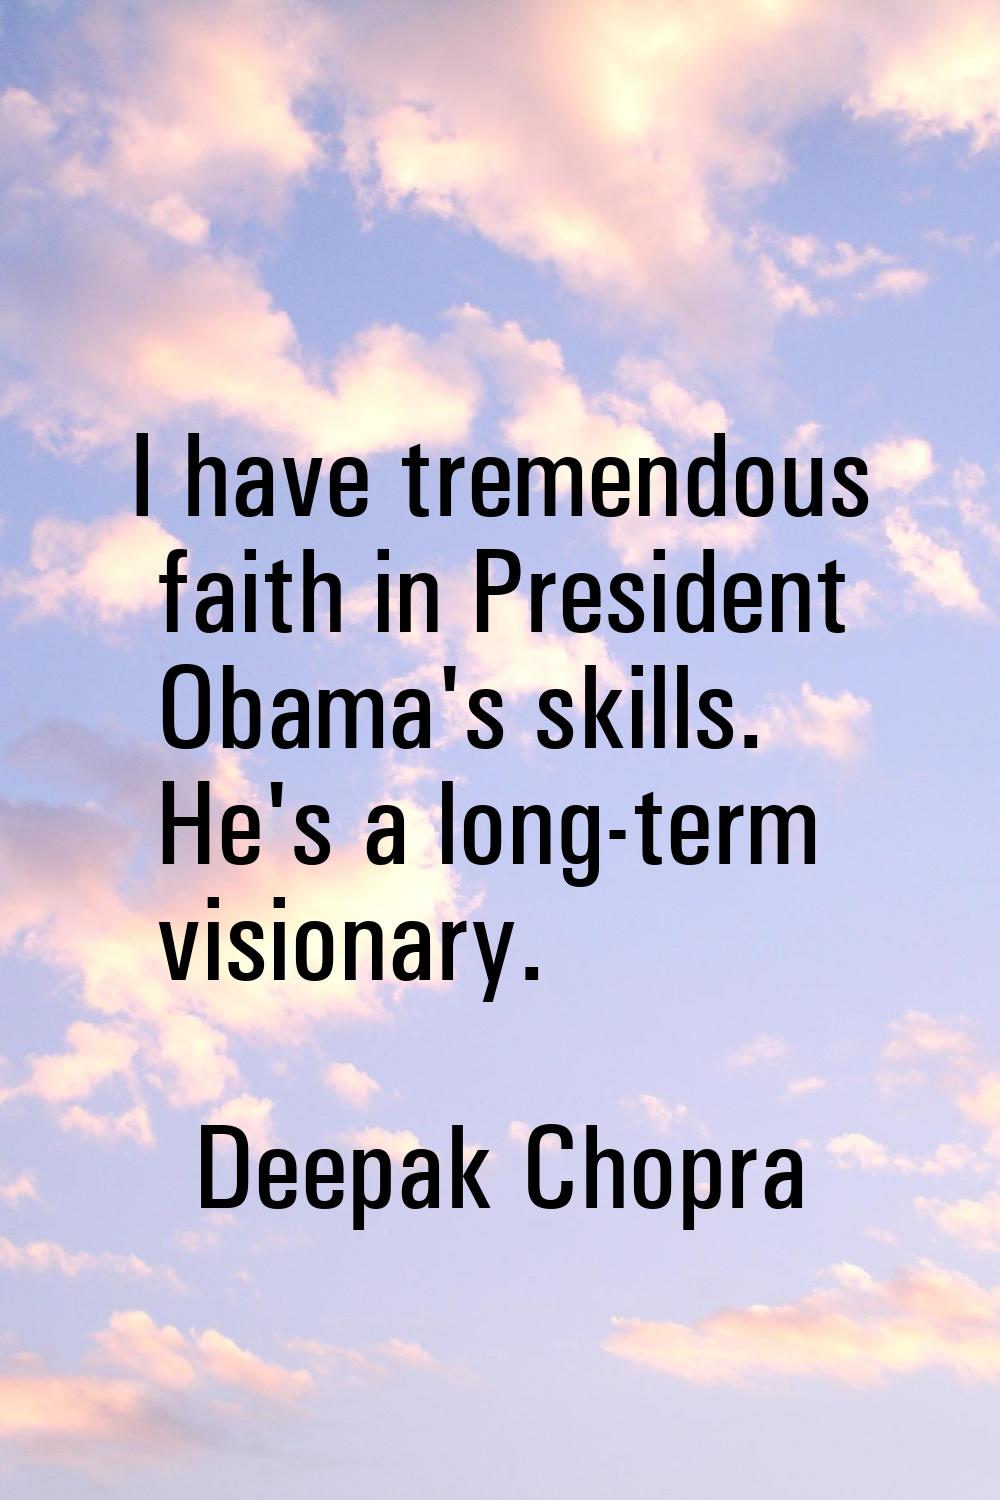 I have tremendous faith in President Obama's skills. He's a long-term visionary.